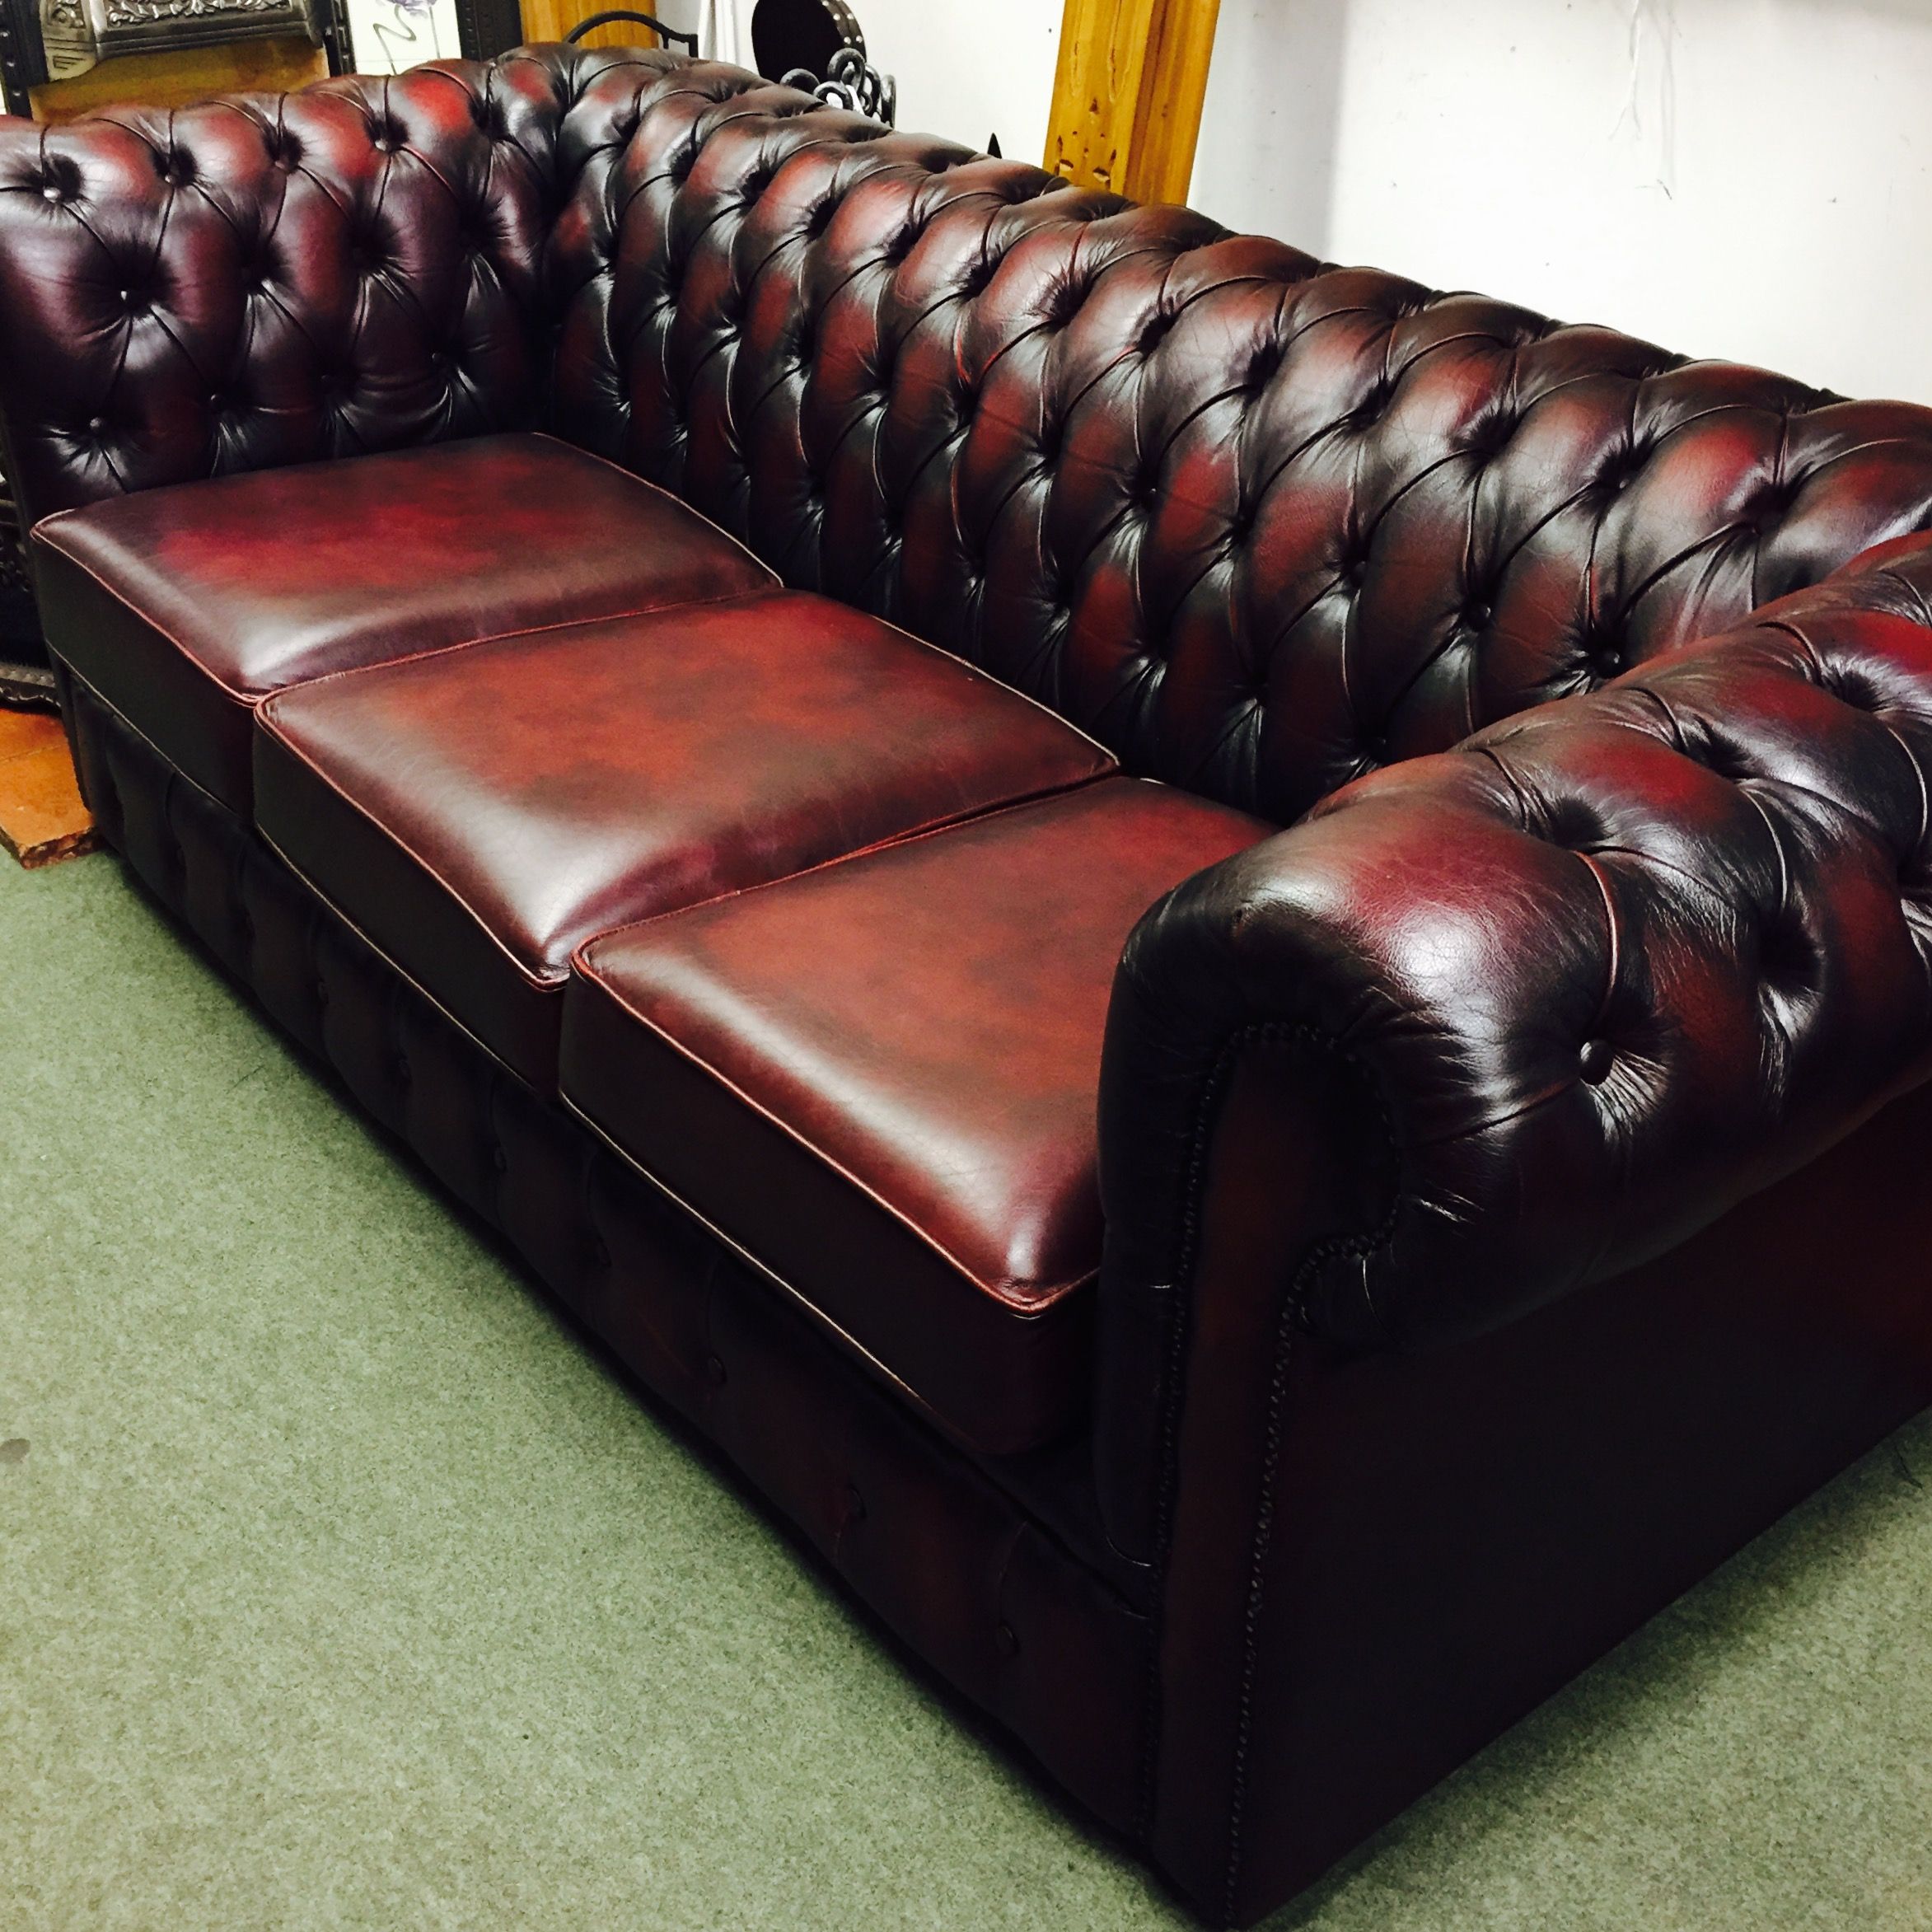 The Dog House Antiques – Pair Of Chesterfield Style Sofa’s Intended For Chesterfield Sofas (View 12 of 21)